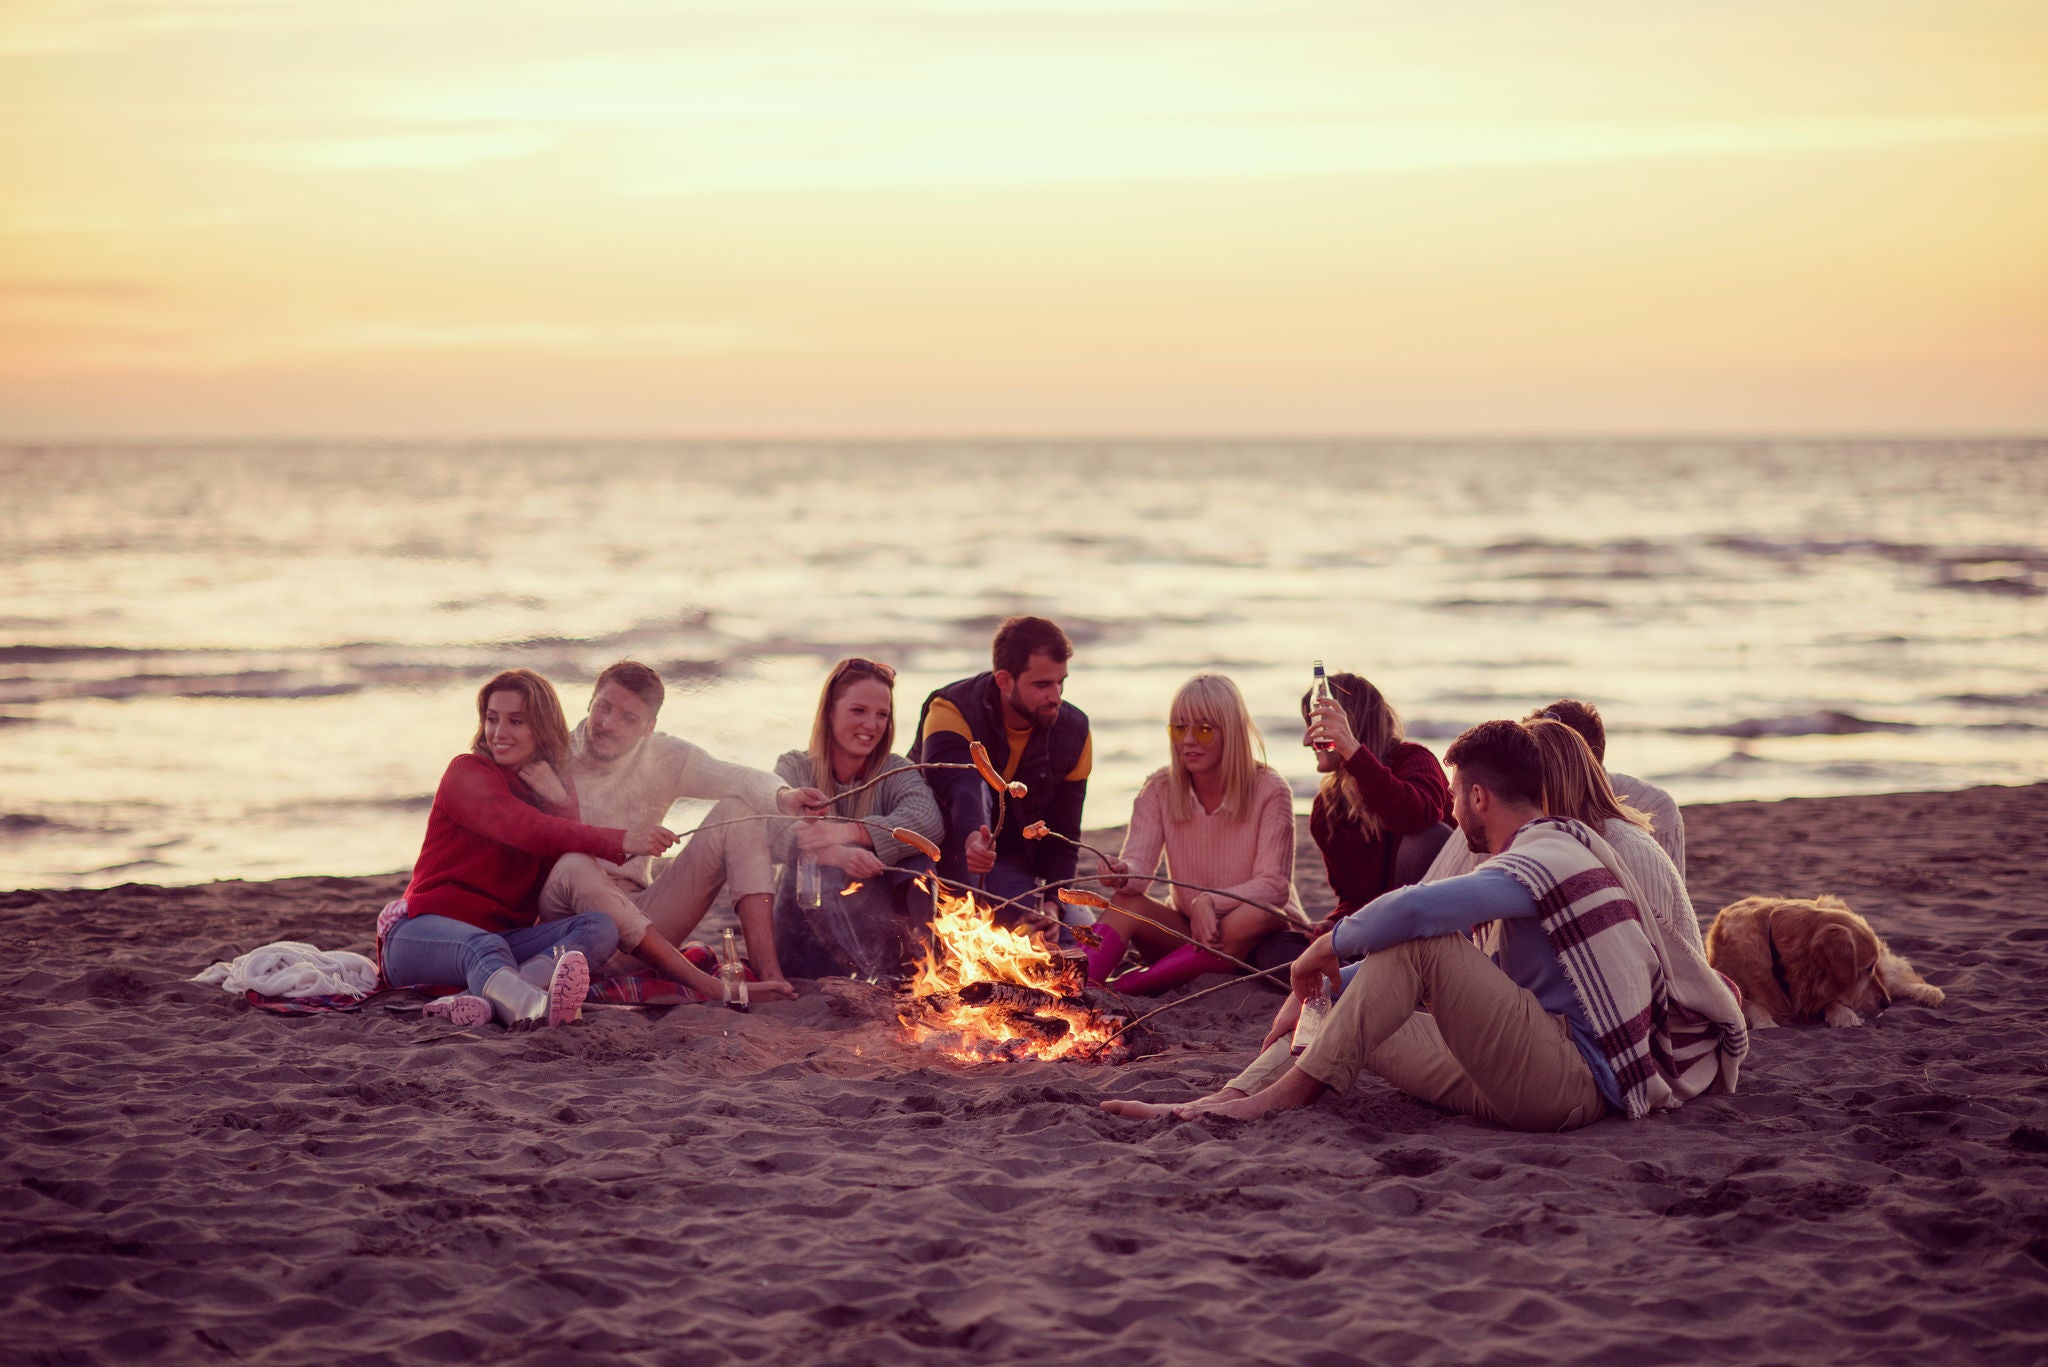 Group of young friends sitting by the fire at autumn beach, grilling sausages and drinking beer, talking and having fun filter